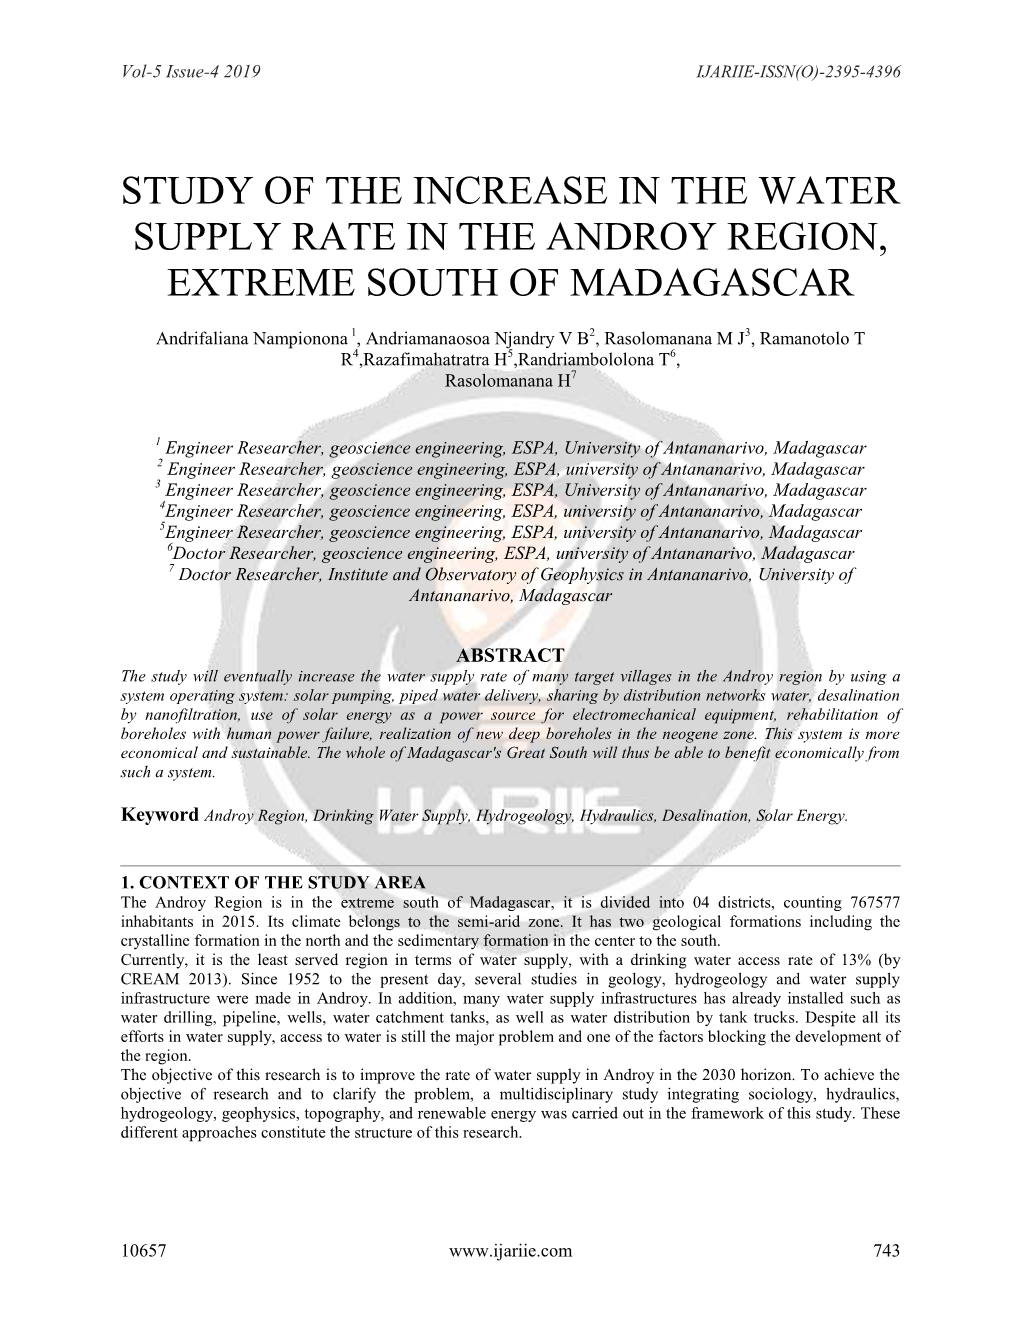 Study of the Increase in the Water Supply Rate in the Androy Region, Extreme South of Madagascar